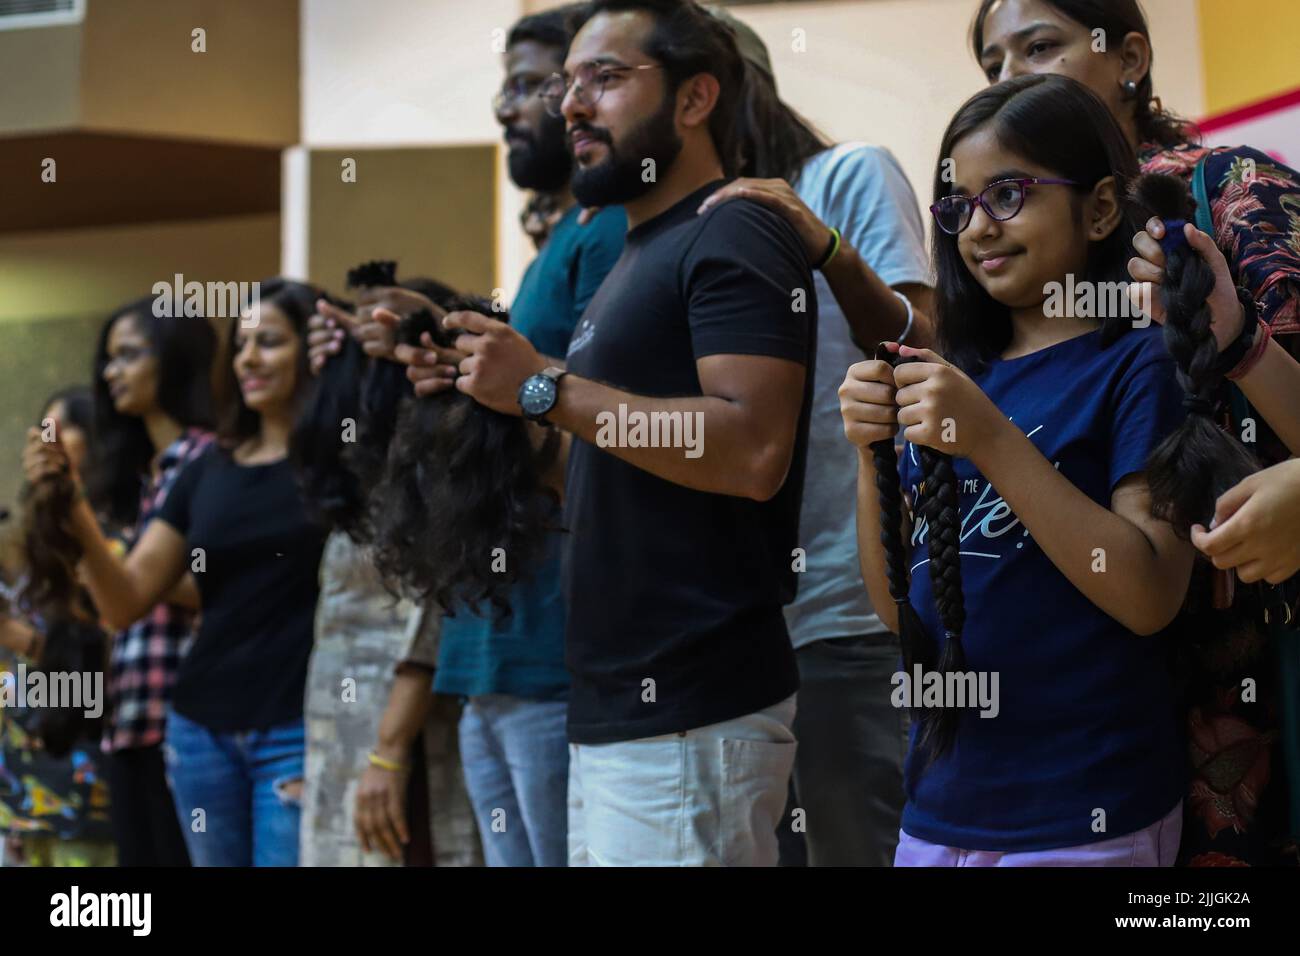 New Delhi, India. 24th July, 2022. Volunteers show their hair locks after  snipping off during a donation drive to support cancer survivors, organized  by Hair for Hope India foundation's Cut-a-thon event in